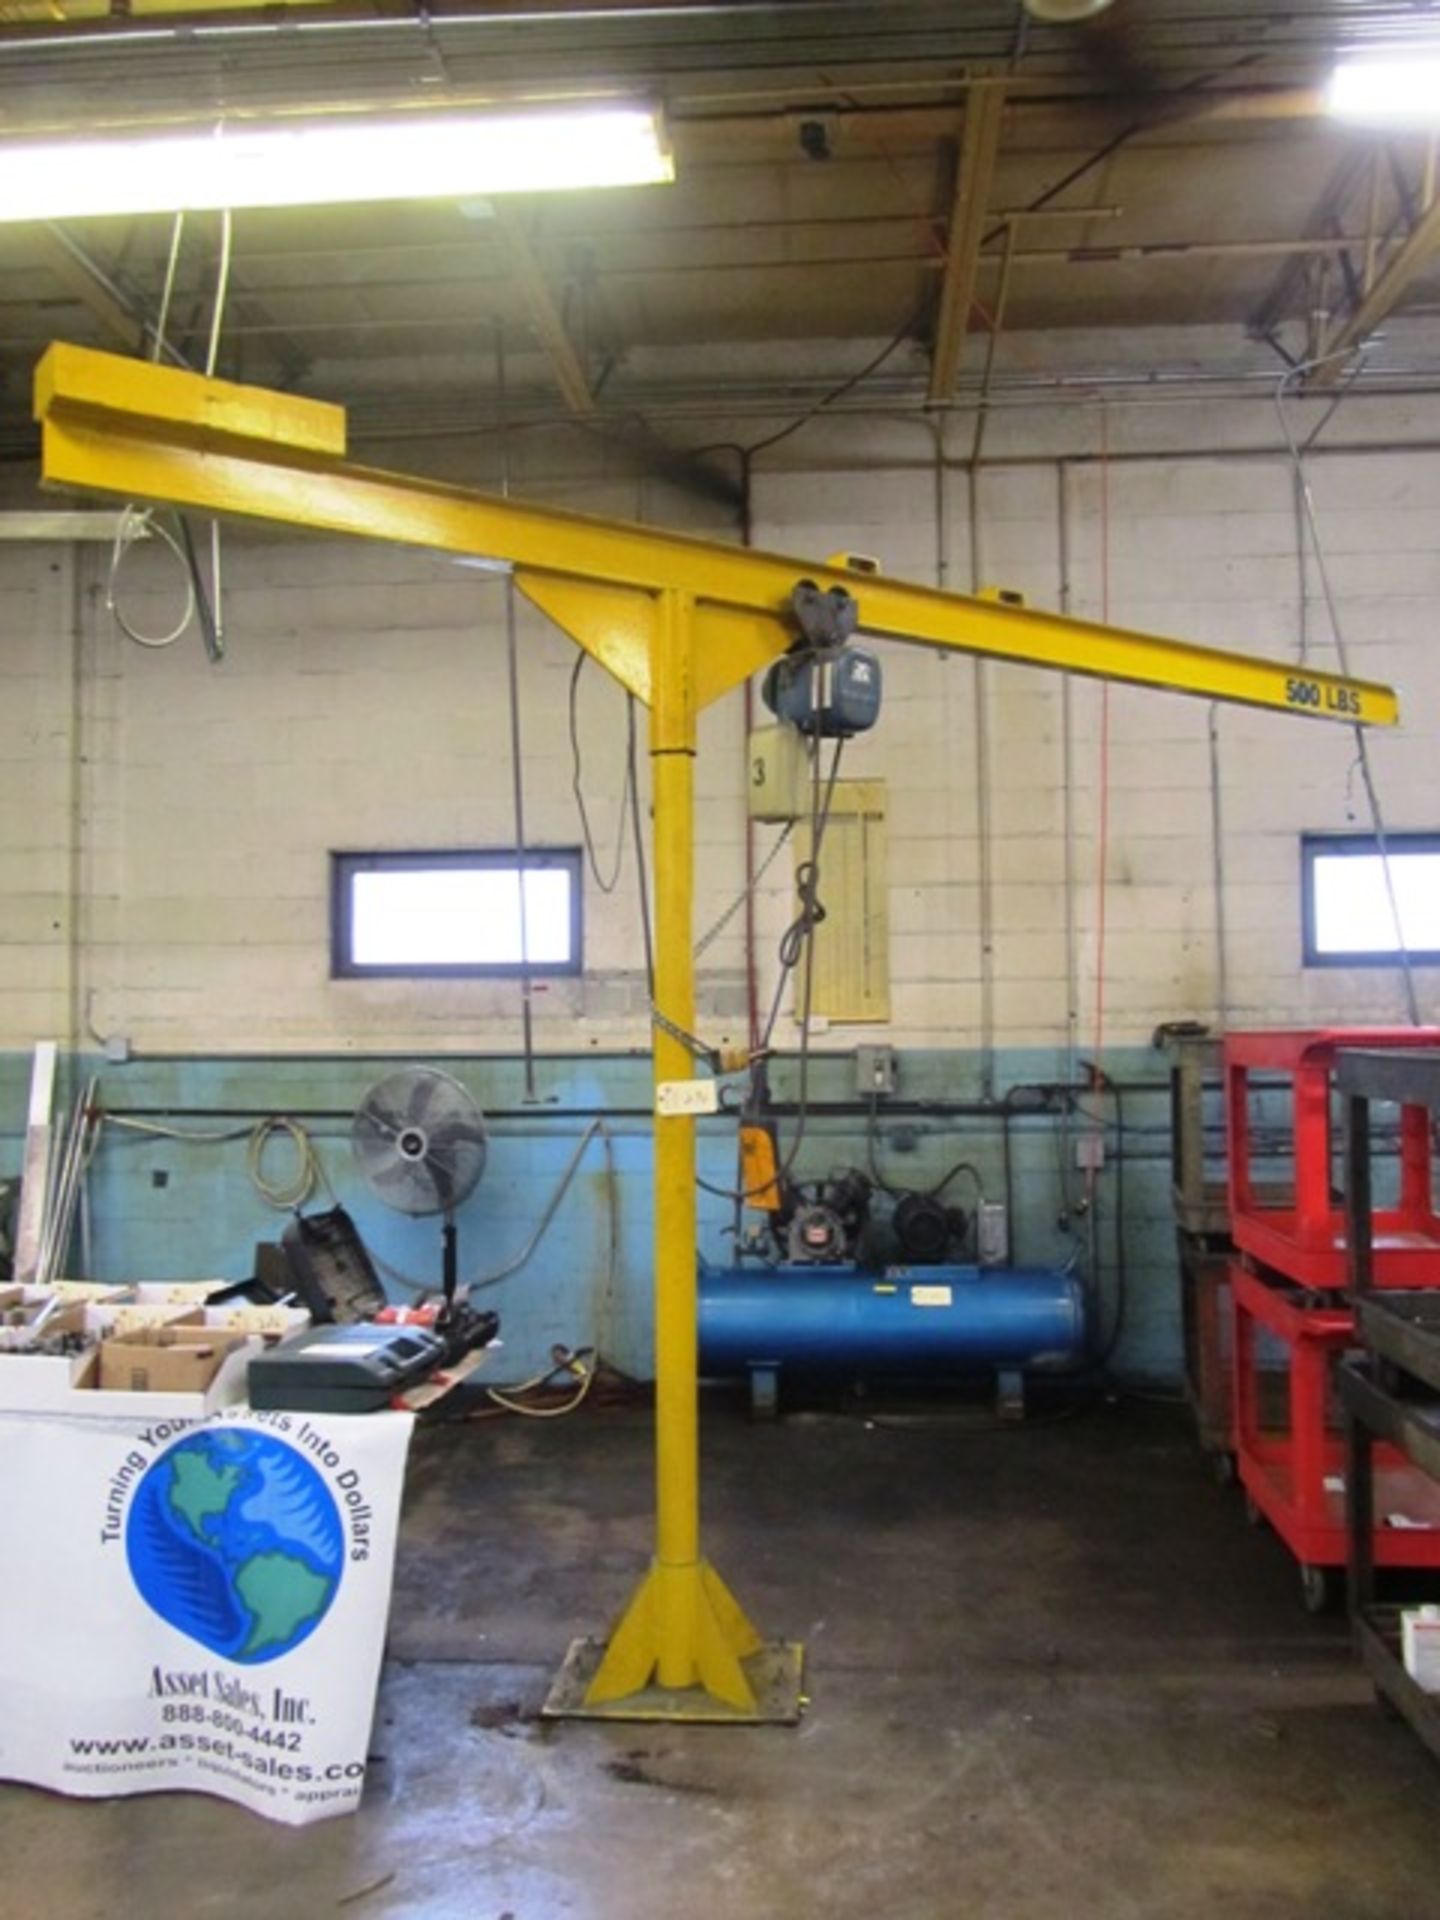 500lb Capacity Floor Mounted Jib Crane with Demag 500lb Capacity Electric Hoist with Pendant